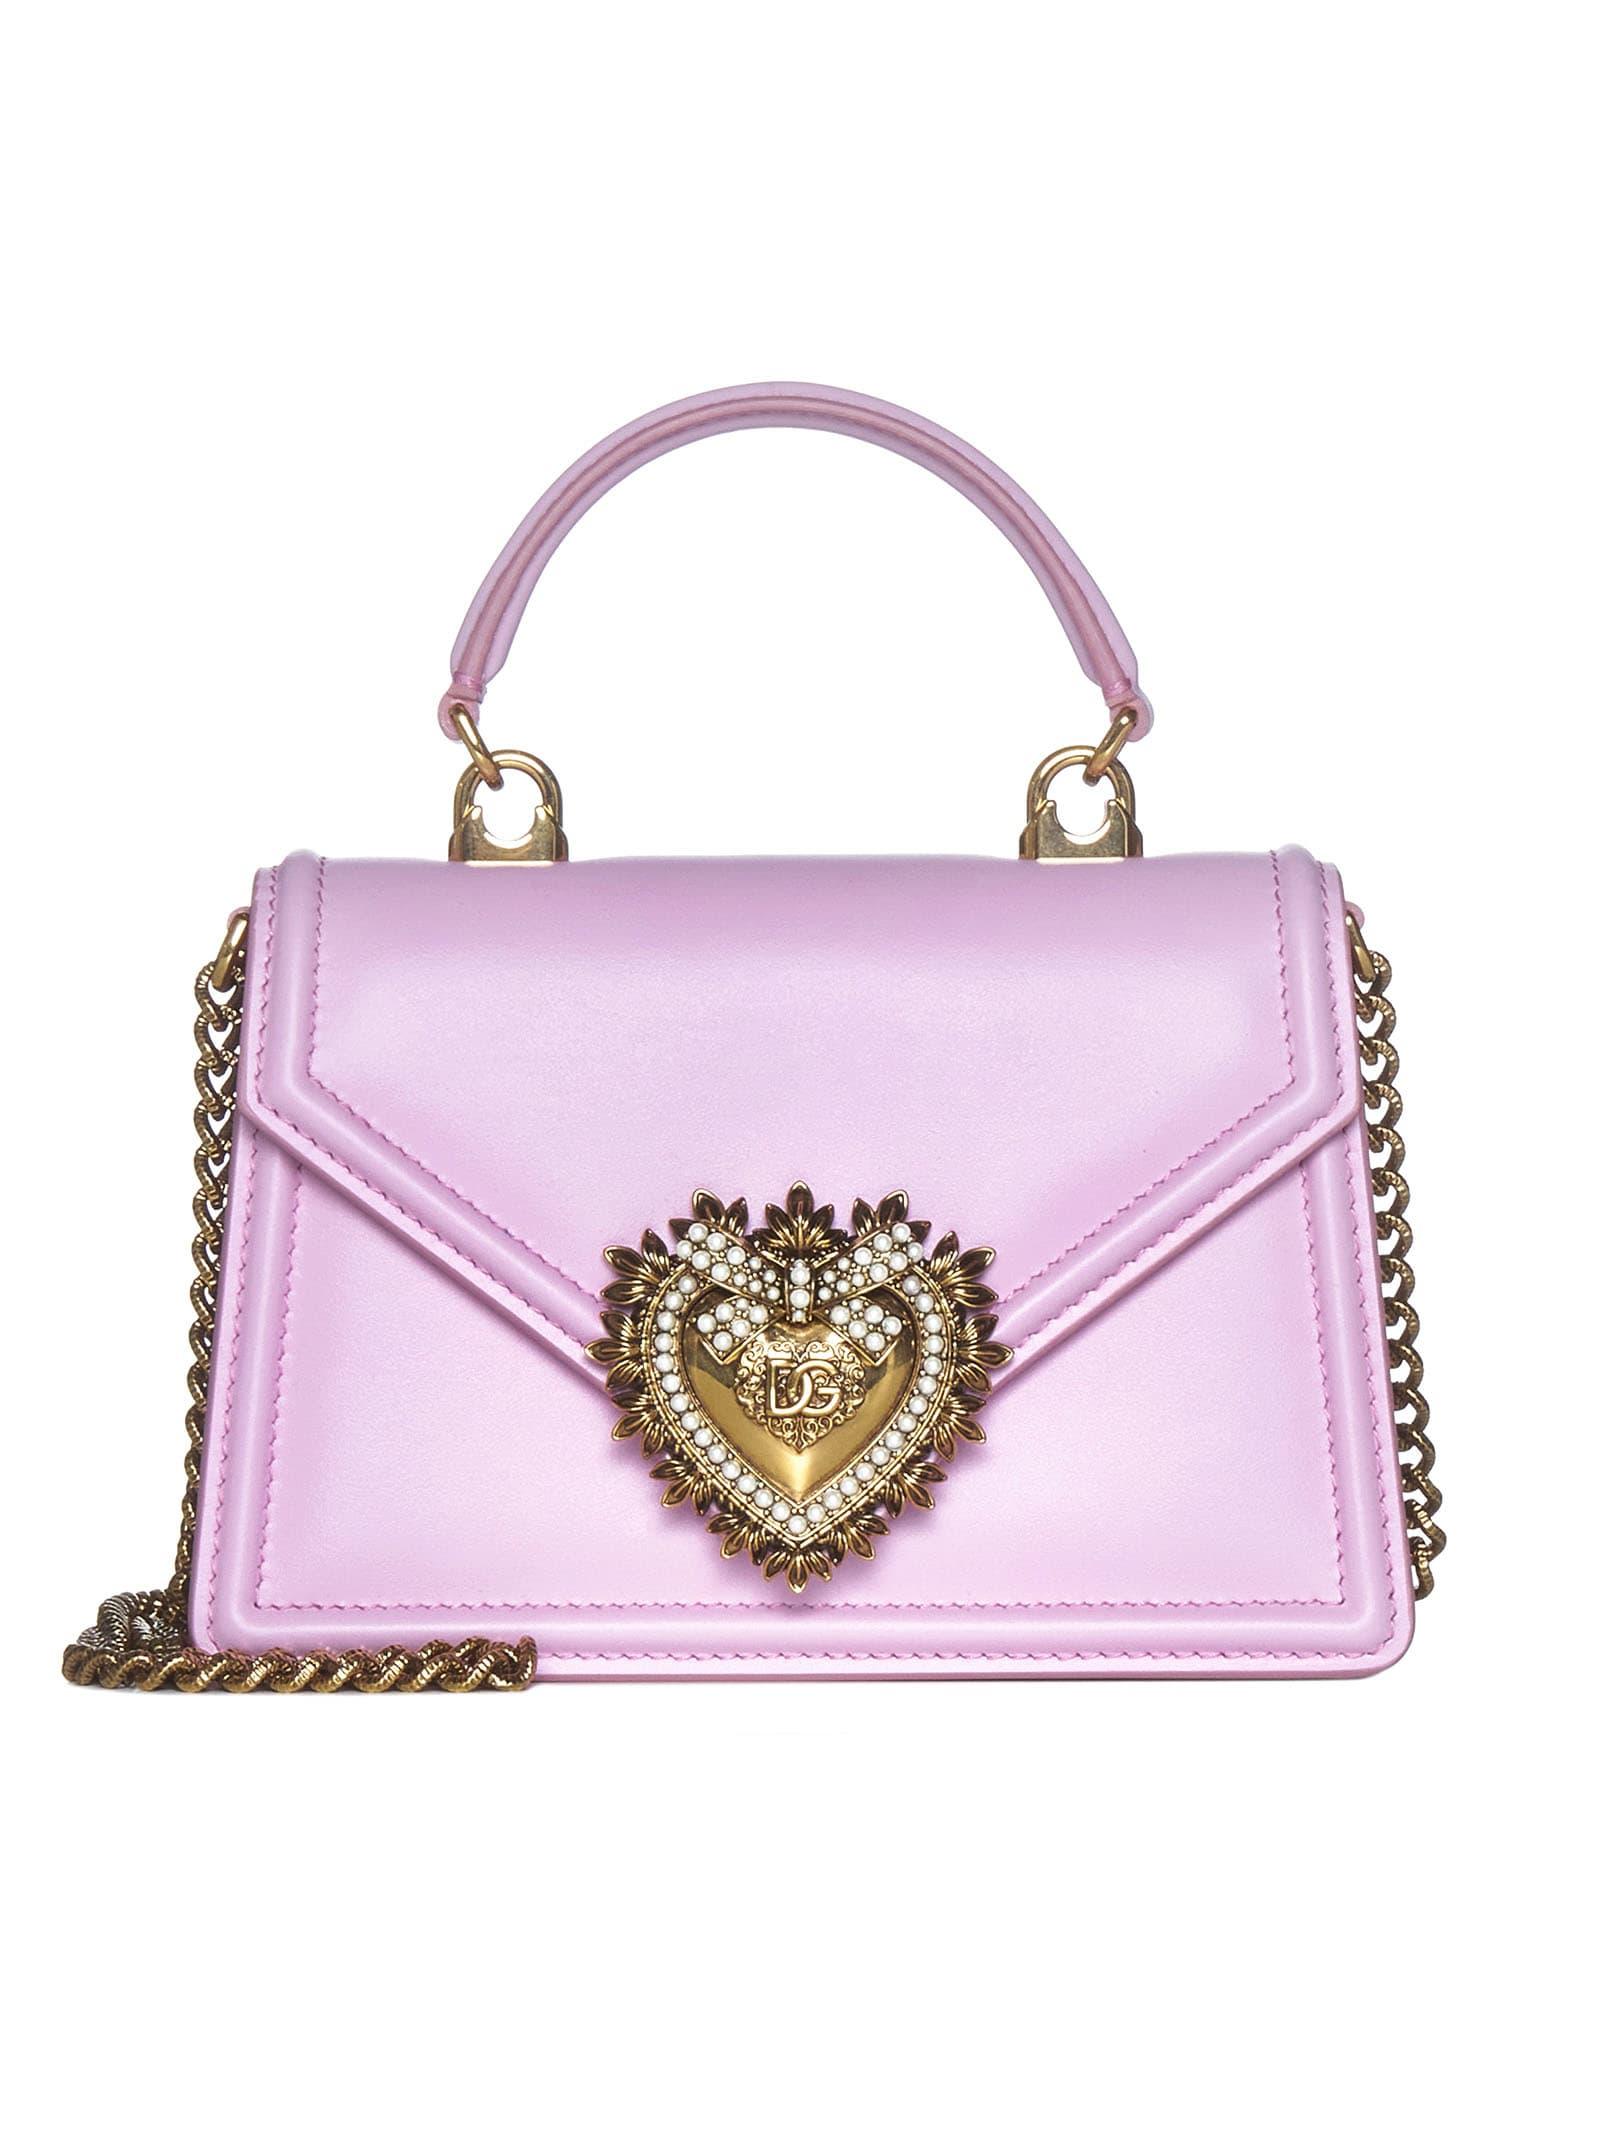 Dolce & Gabbana Devotion Embellished Small Tote Bag in Pink | Lyst